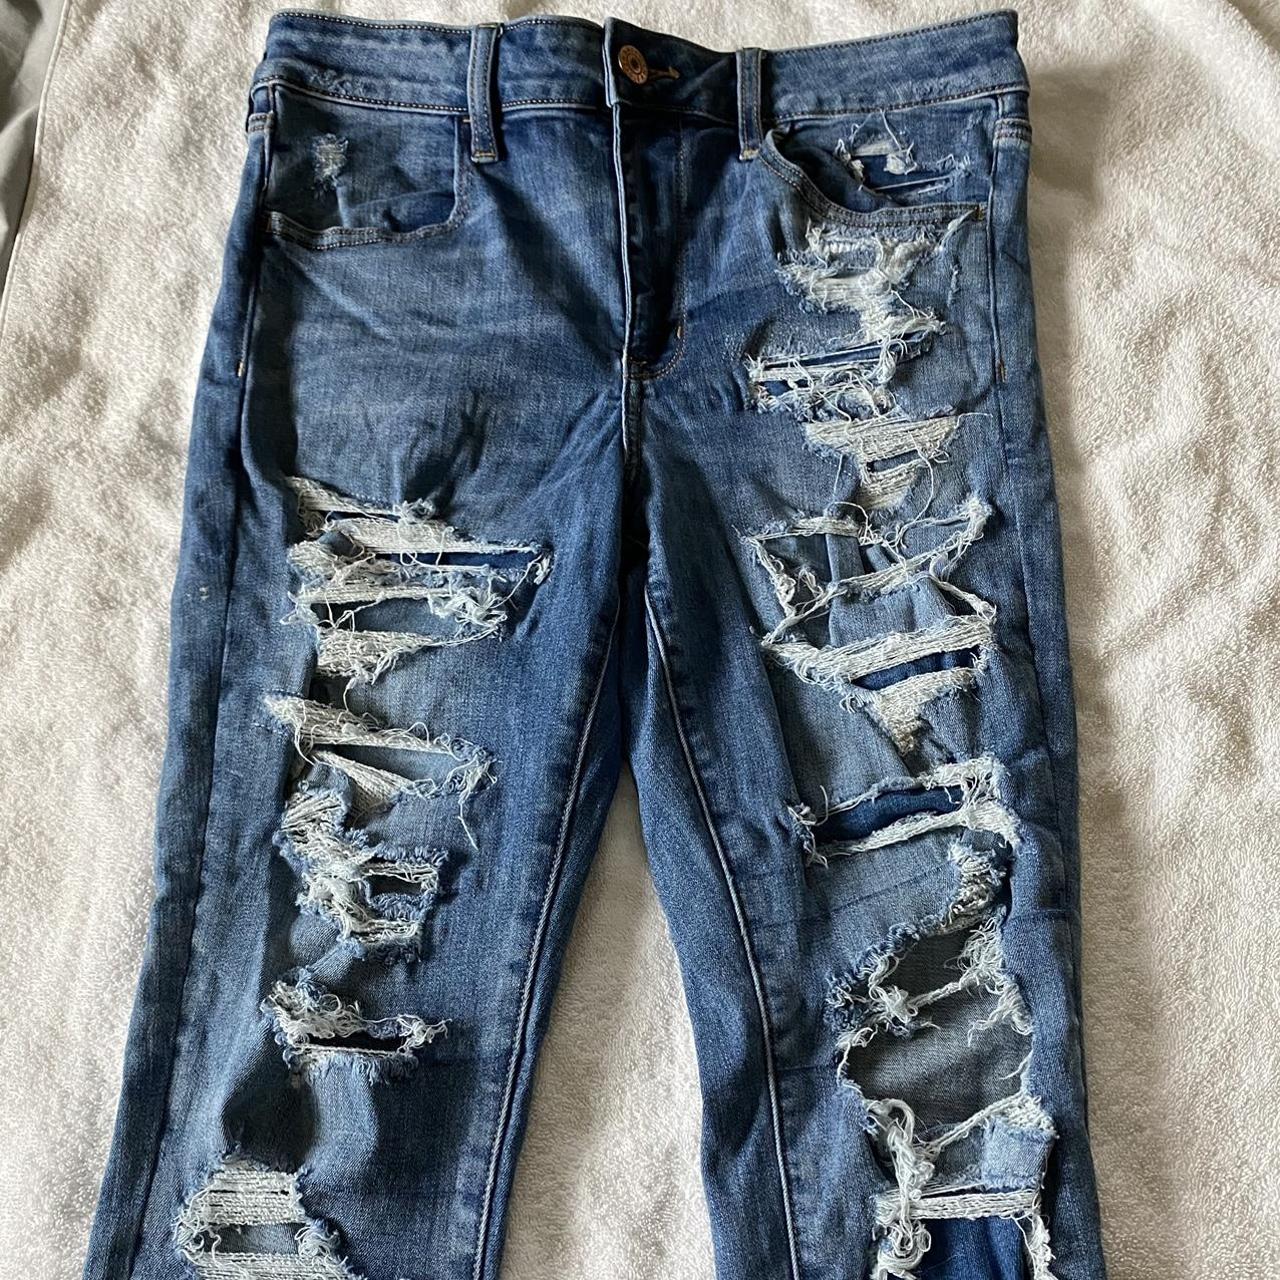 Preloved american eagle distressed/ripped jeans!!